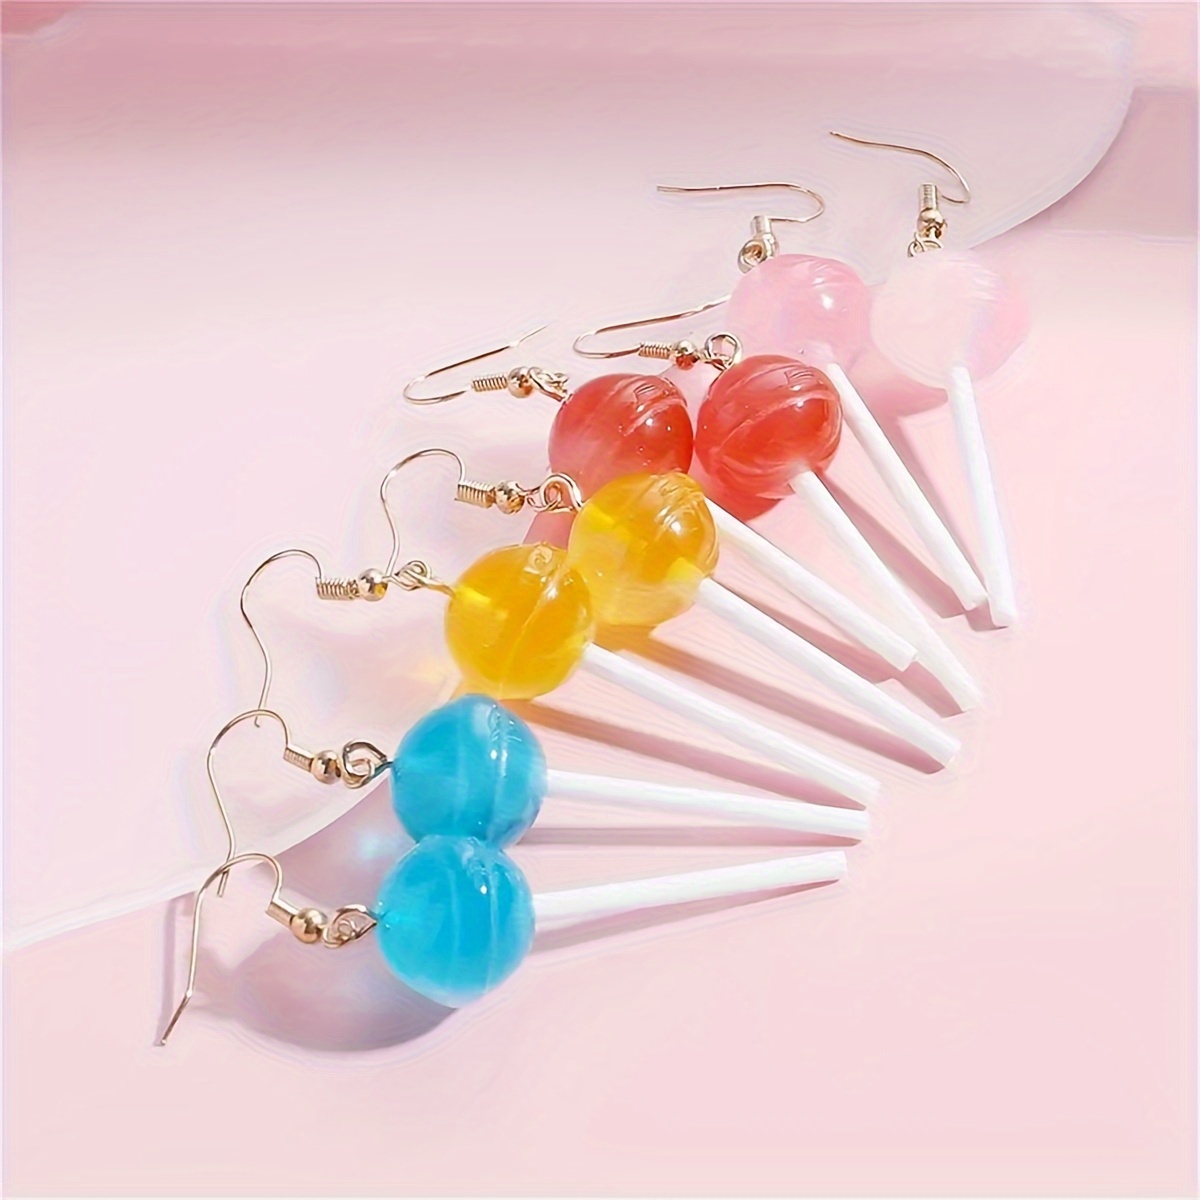 

4 Paris Of Drop Earrings Sweet Lollipop Design Round Or Heart Pick A Style U Prefer Match Daily Outfits Party Accessories